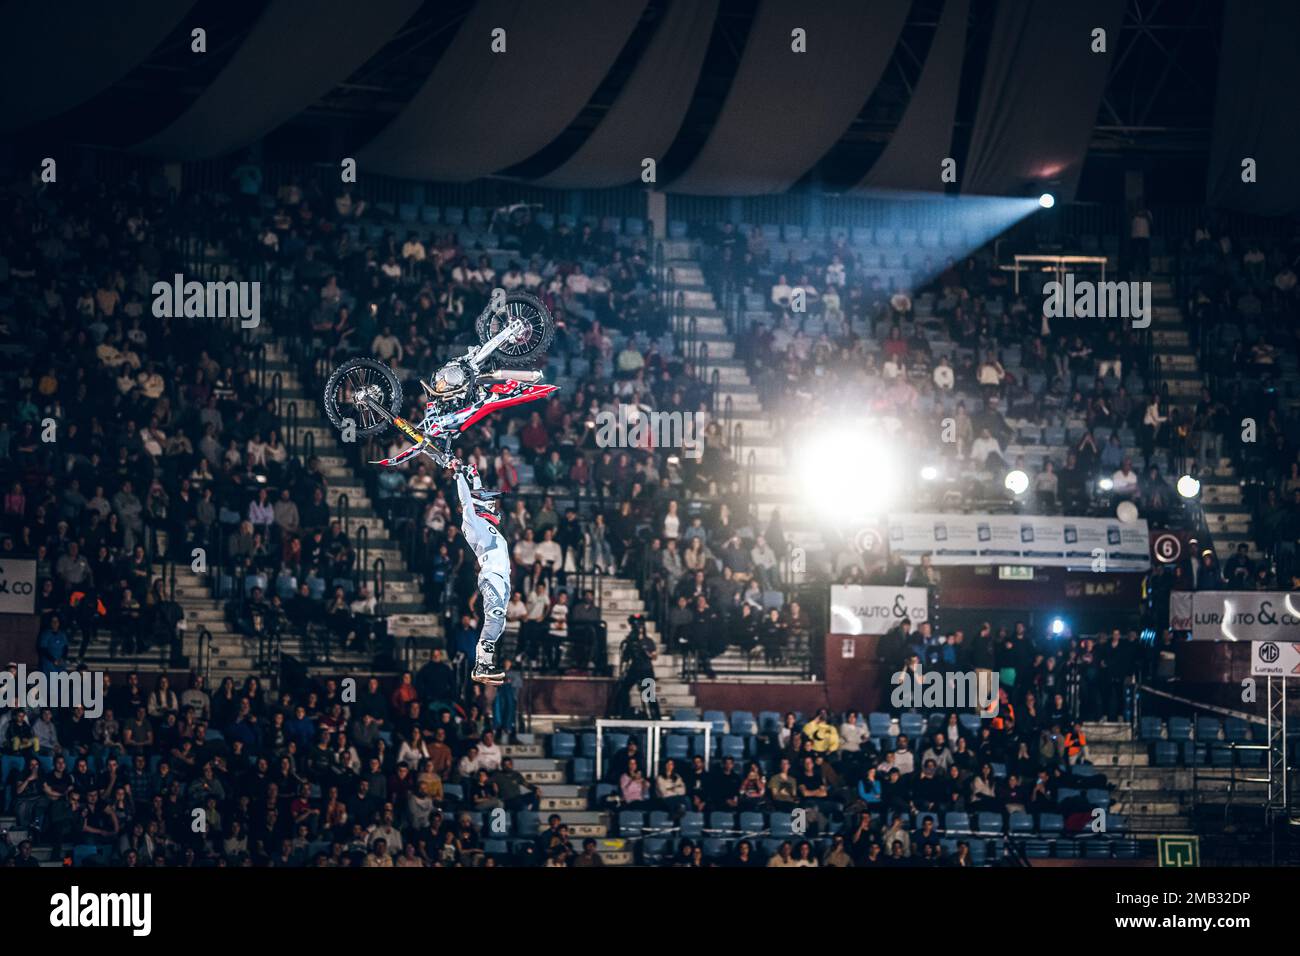 Maikel Melero participating in a Freestyle event in Spain. Stock Photo